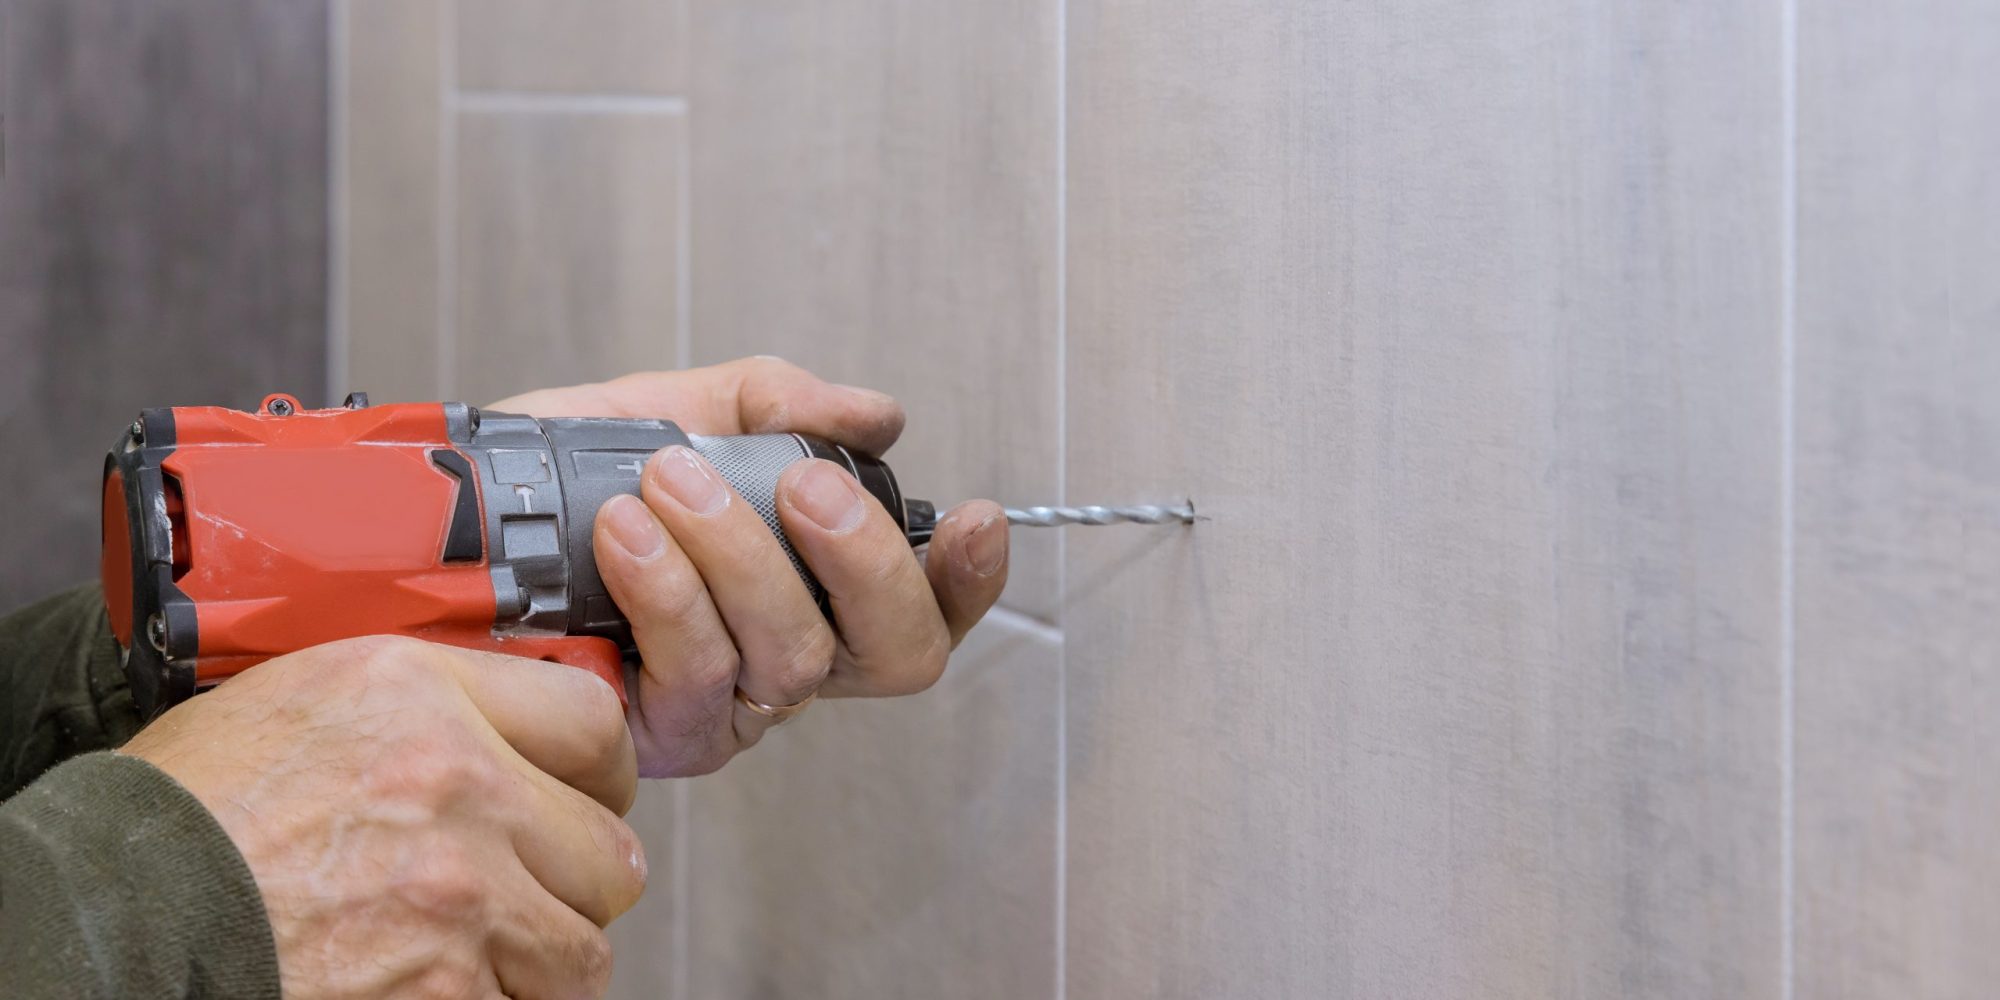 Hands of plumber using a drill to create new holes in tile bathroom wall for installing bathroom accessories